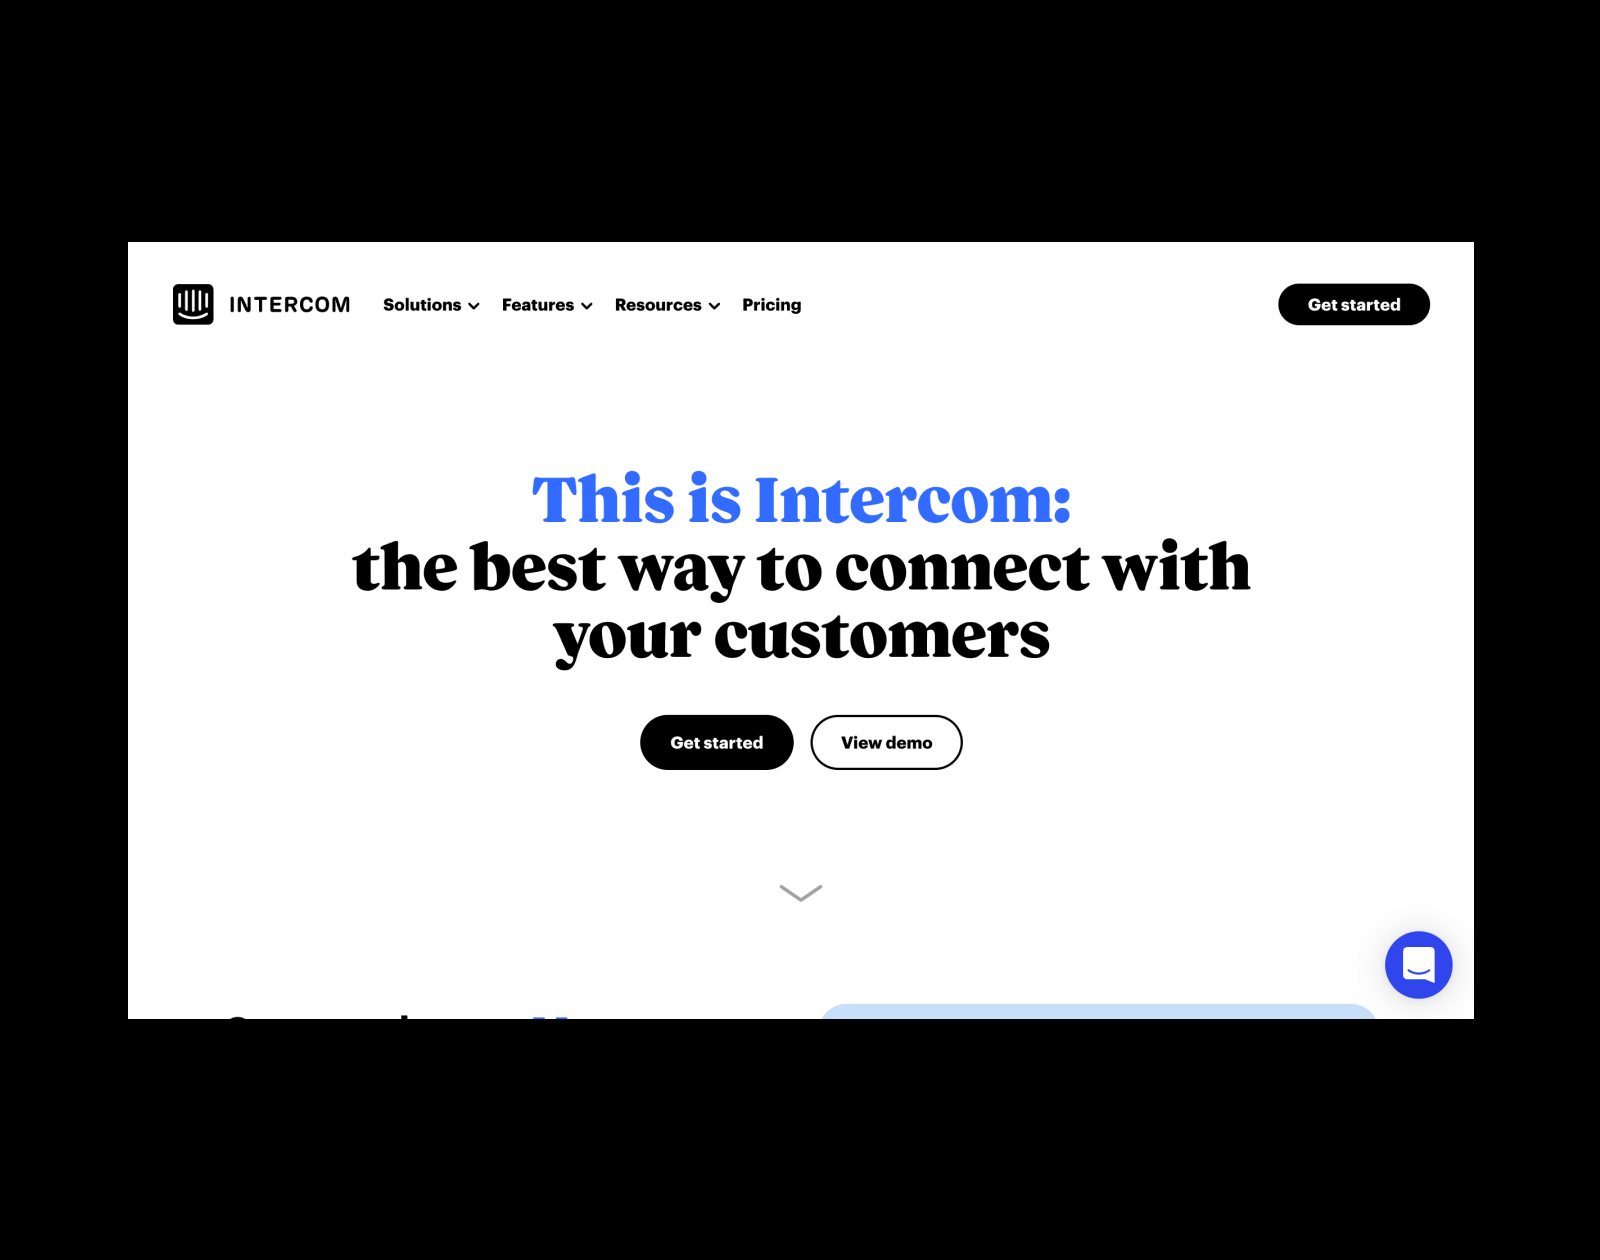 Intercom is a platform that includes web chat, tech support, and mail automation